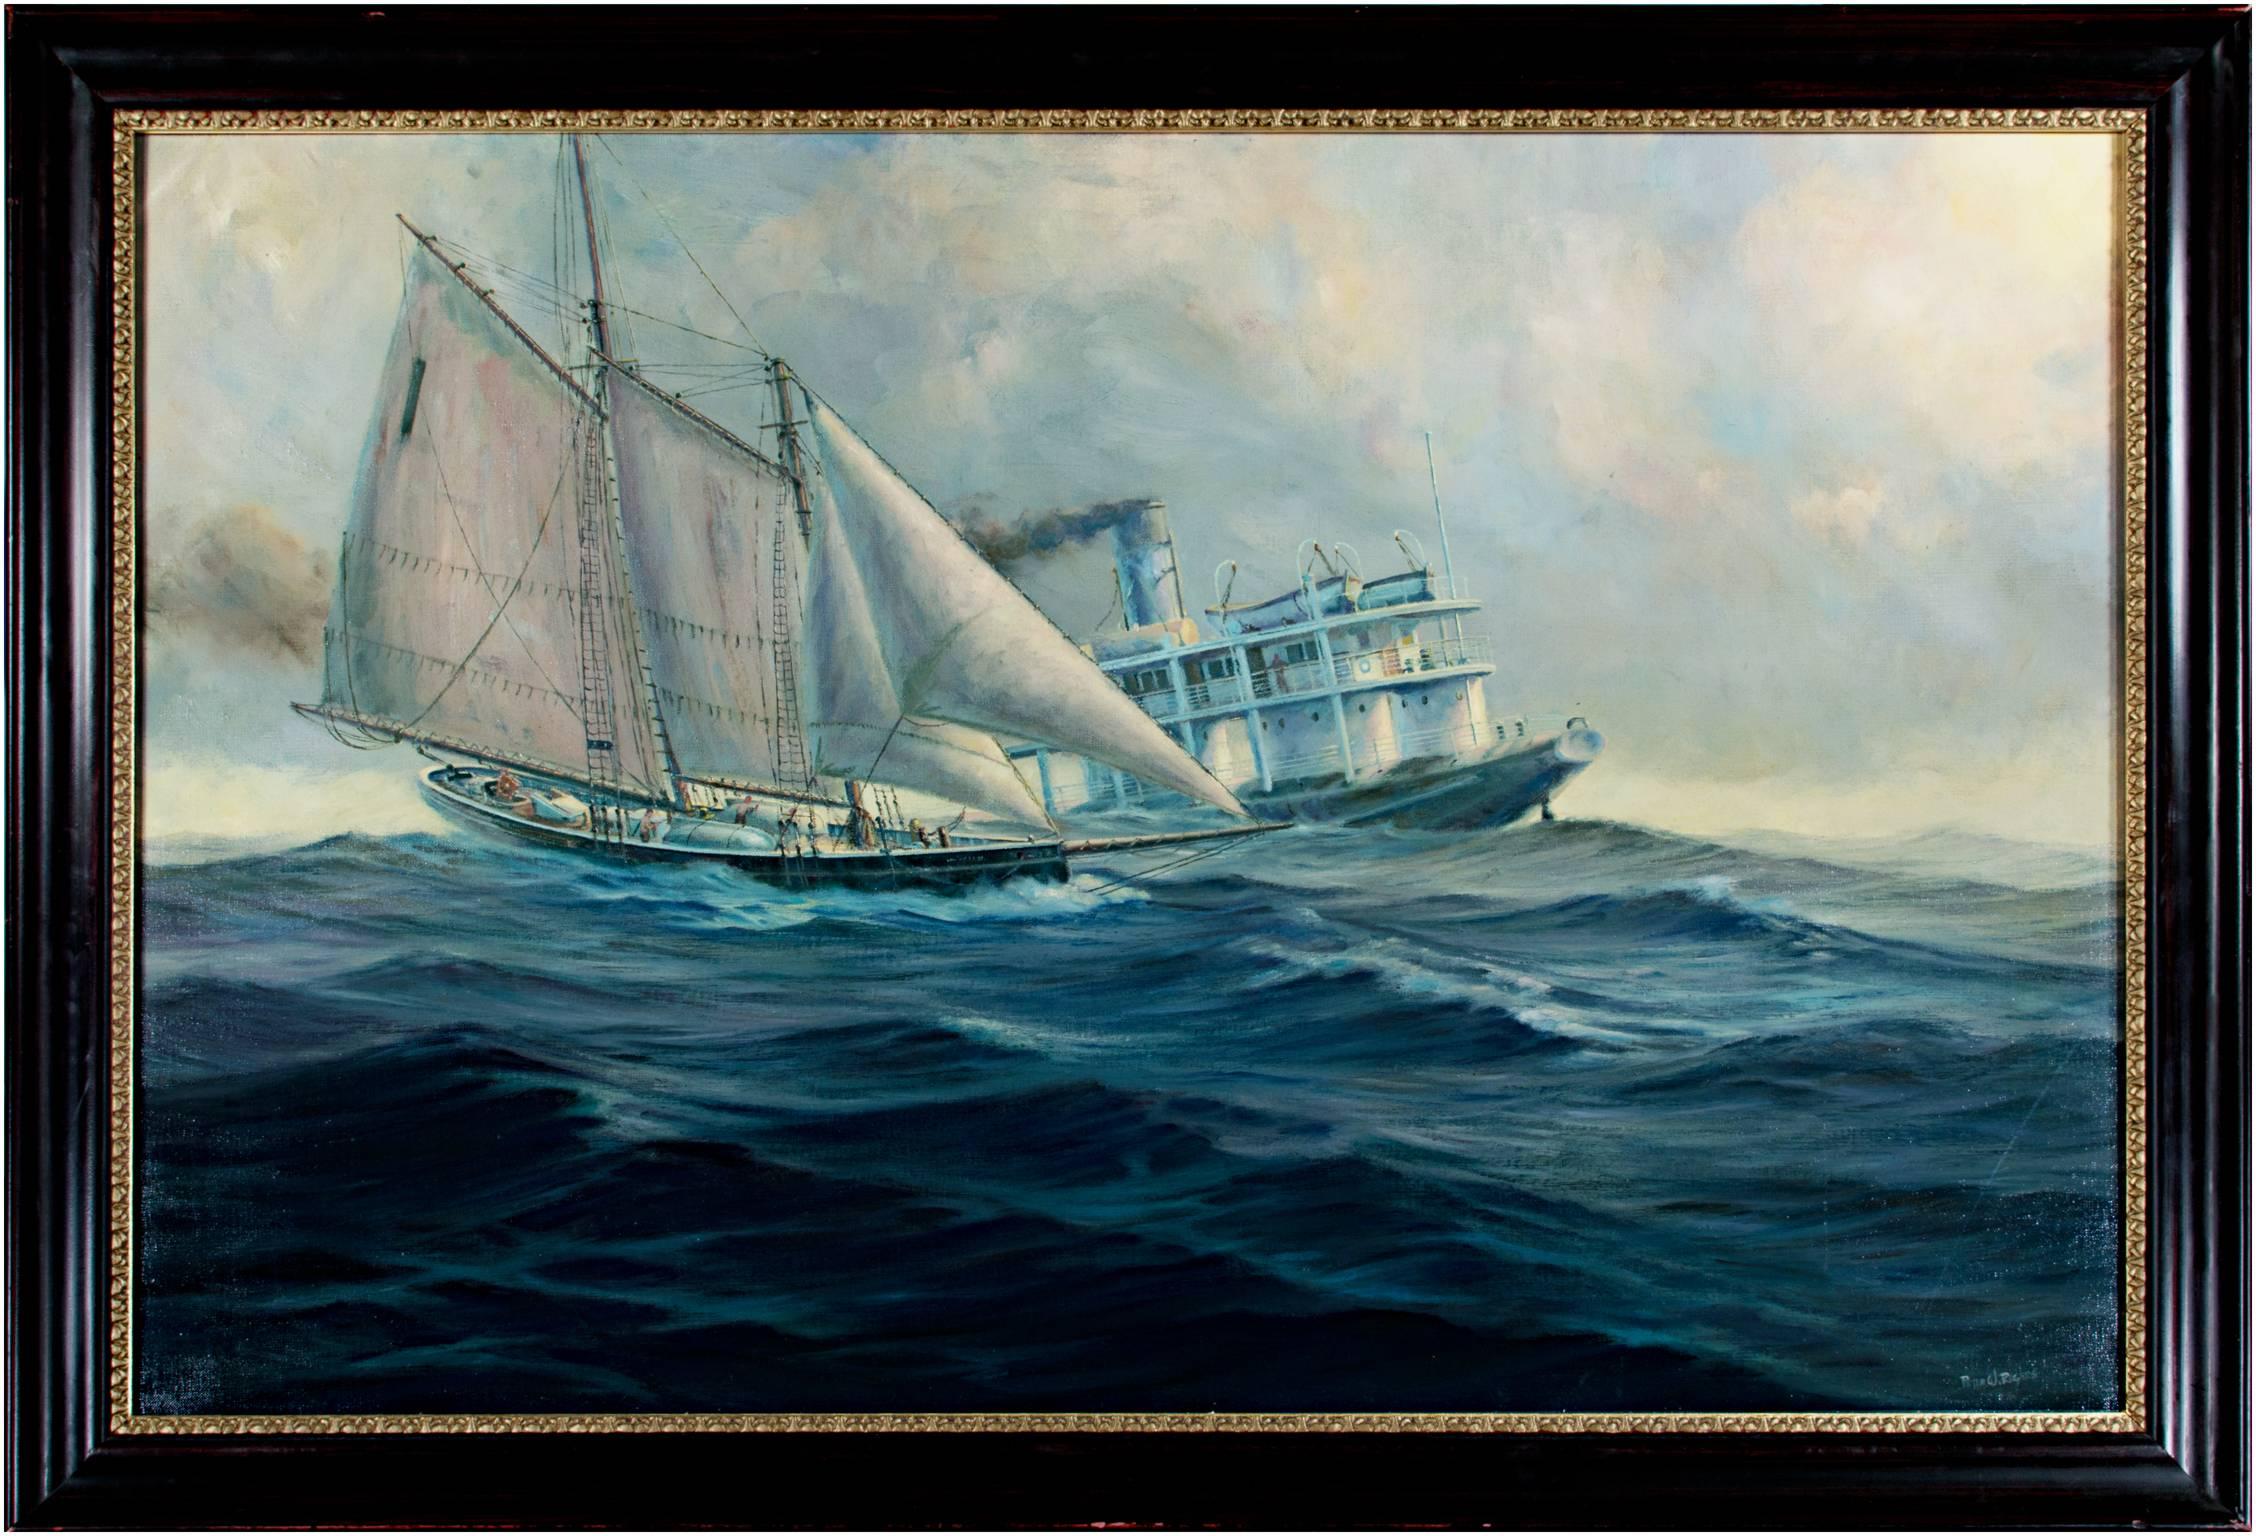 Sailboat and Steamer Maritime Scene - Painting by Peter W. Rogers